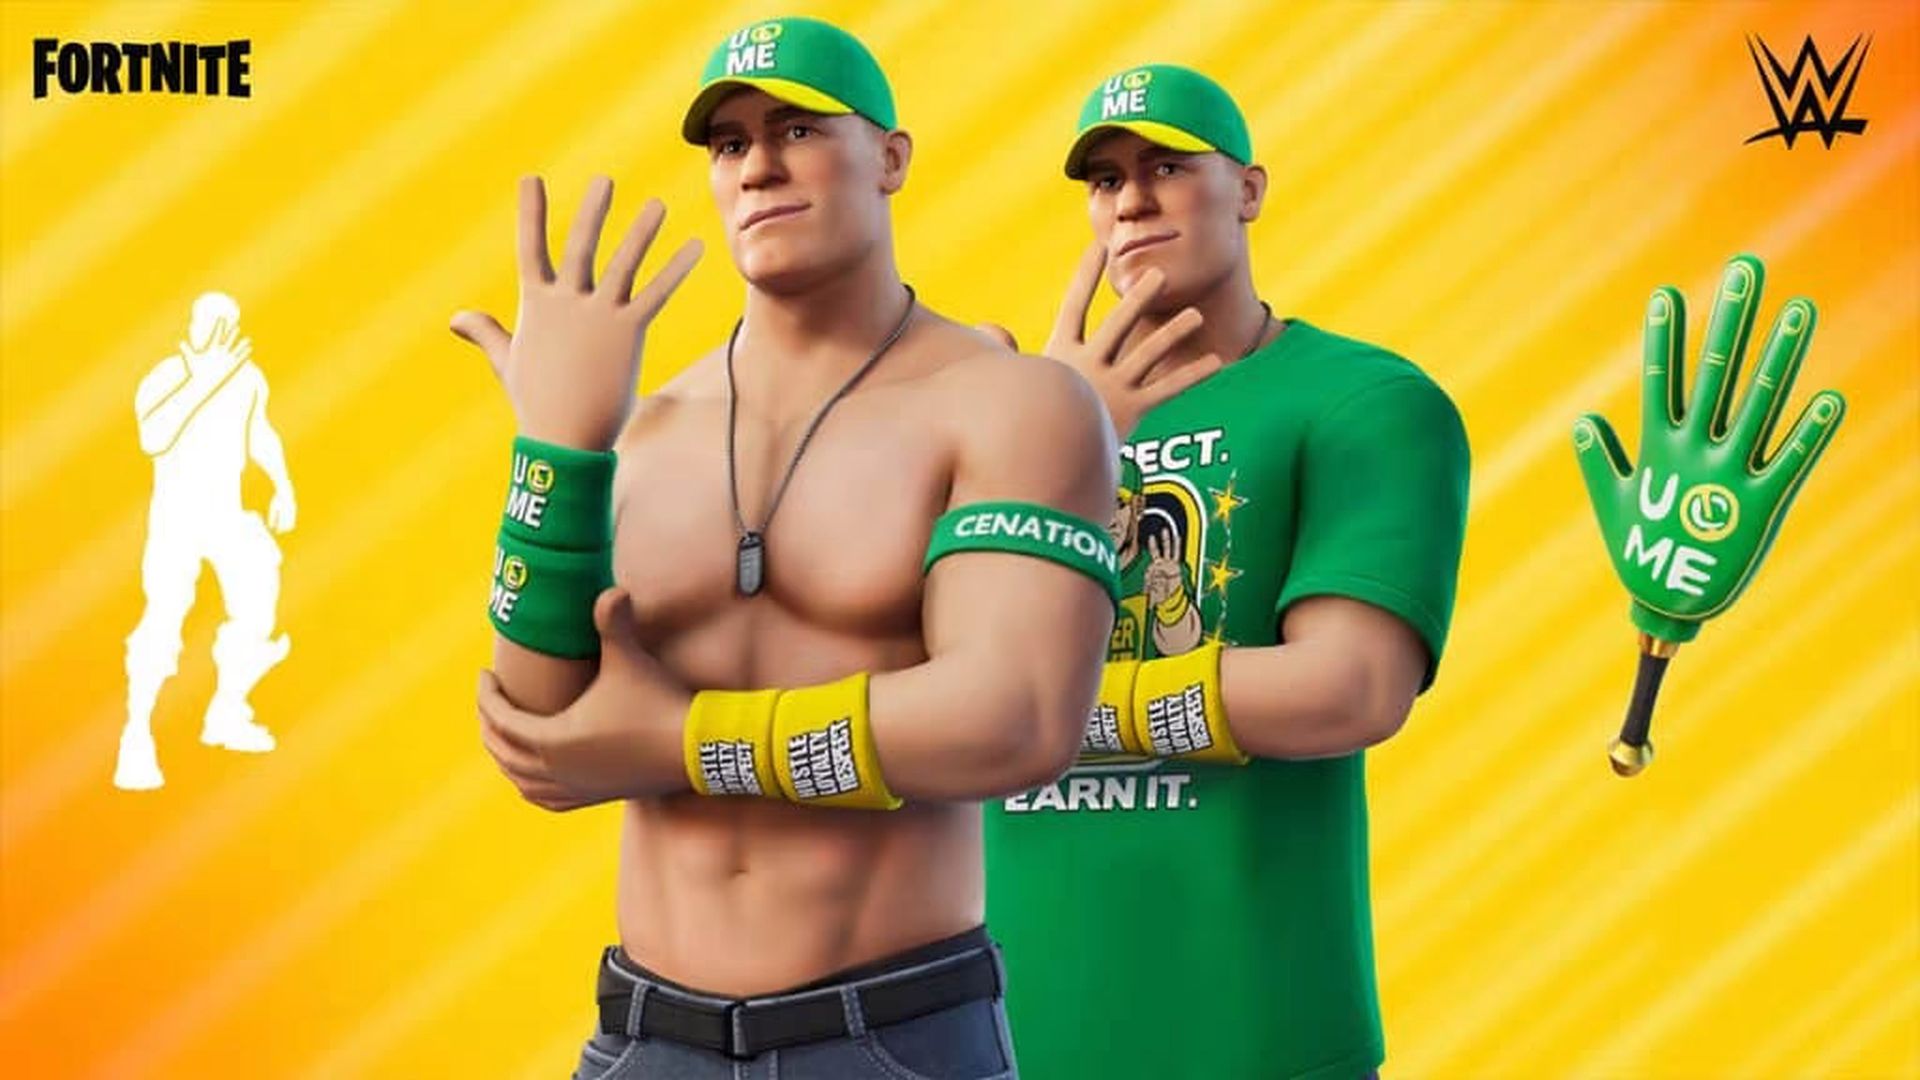 In this article, we are going to be covering How to get John Cena Fortnite skin?: Release date & price, so you can enjoy playing as the WWE legend in the game.